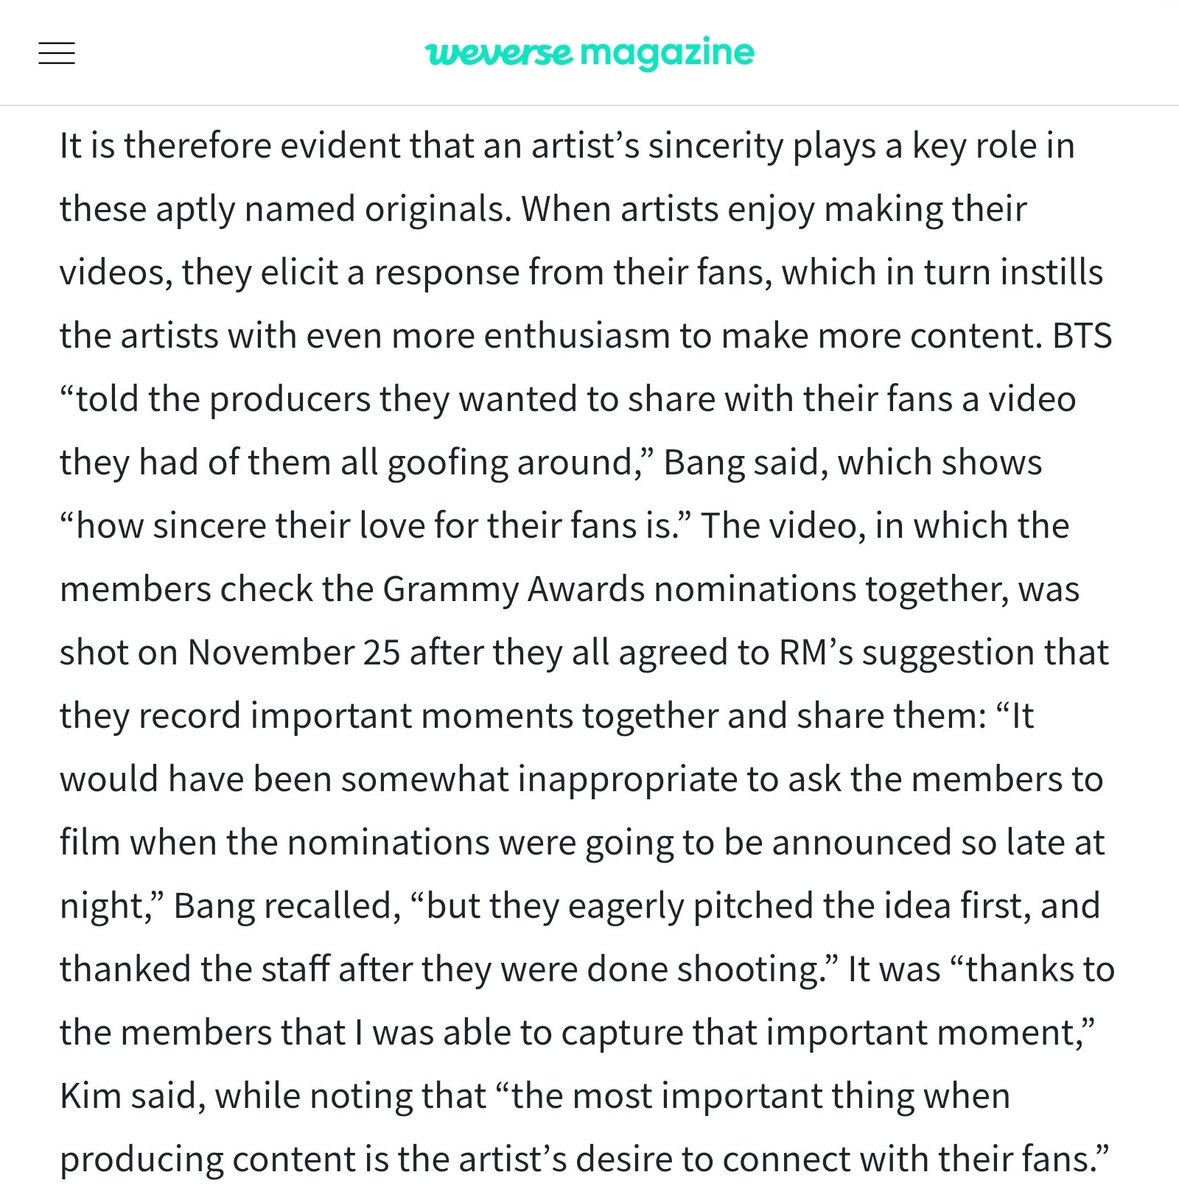 Allow me to add in more proof! Please read the Weverse Article which matches all previous interbiews and articles written for BTS and Mr. Bang! Not to mention, the Harvard Business Case Study!   #BTSARMY    @BTS_twt :  https://bit.ly/39YBkSG 